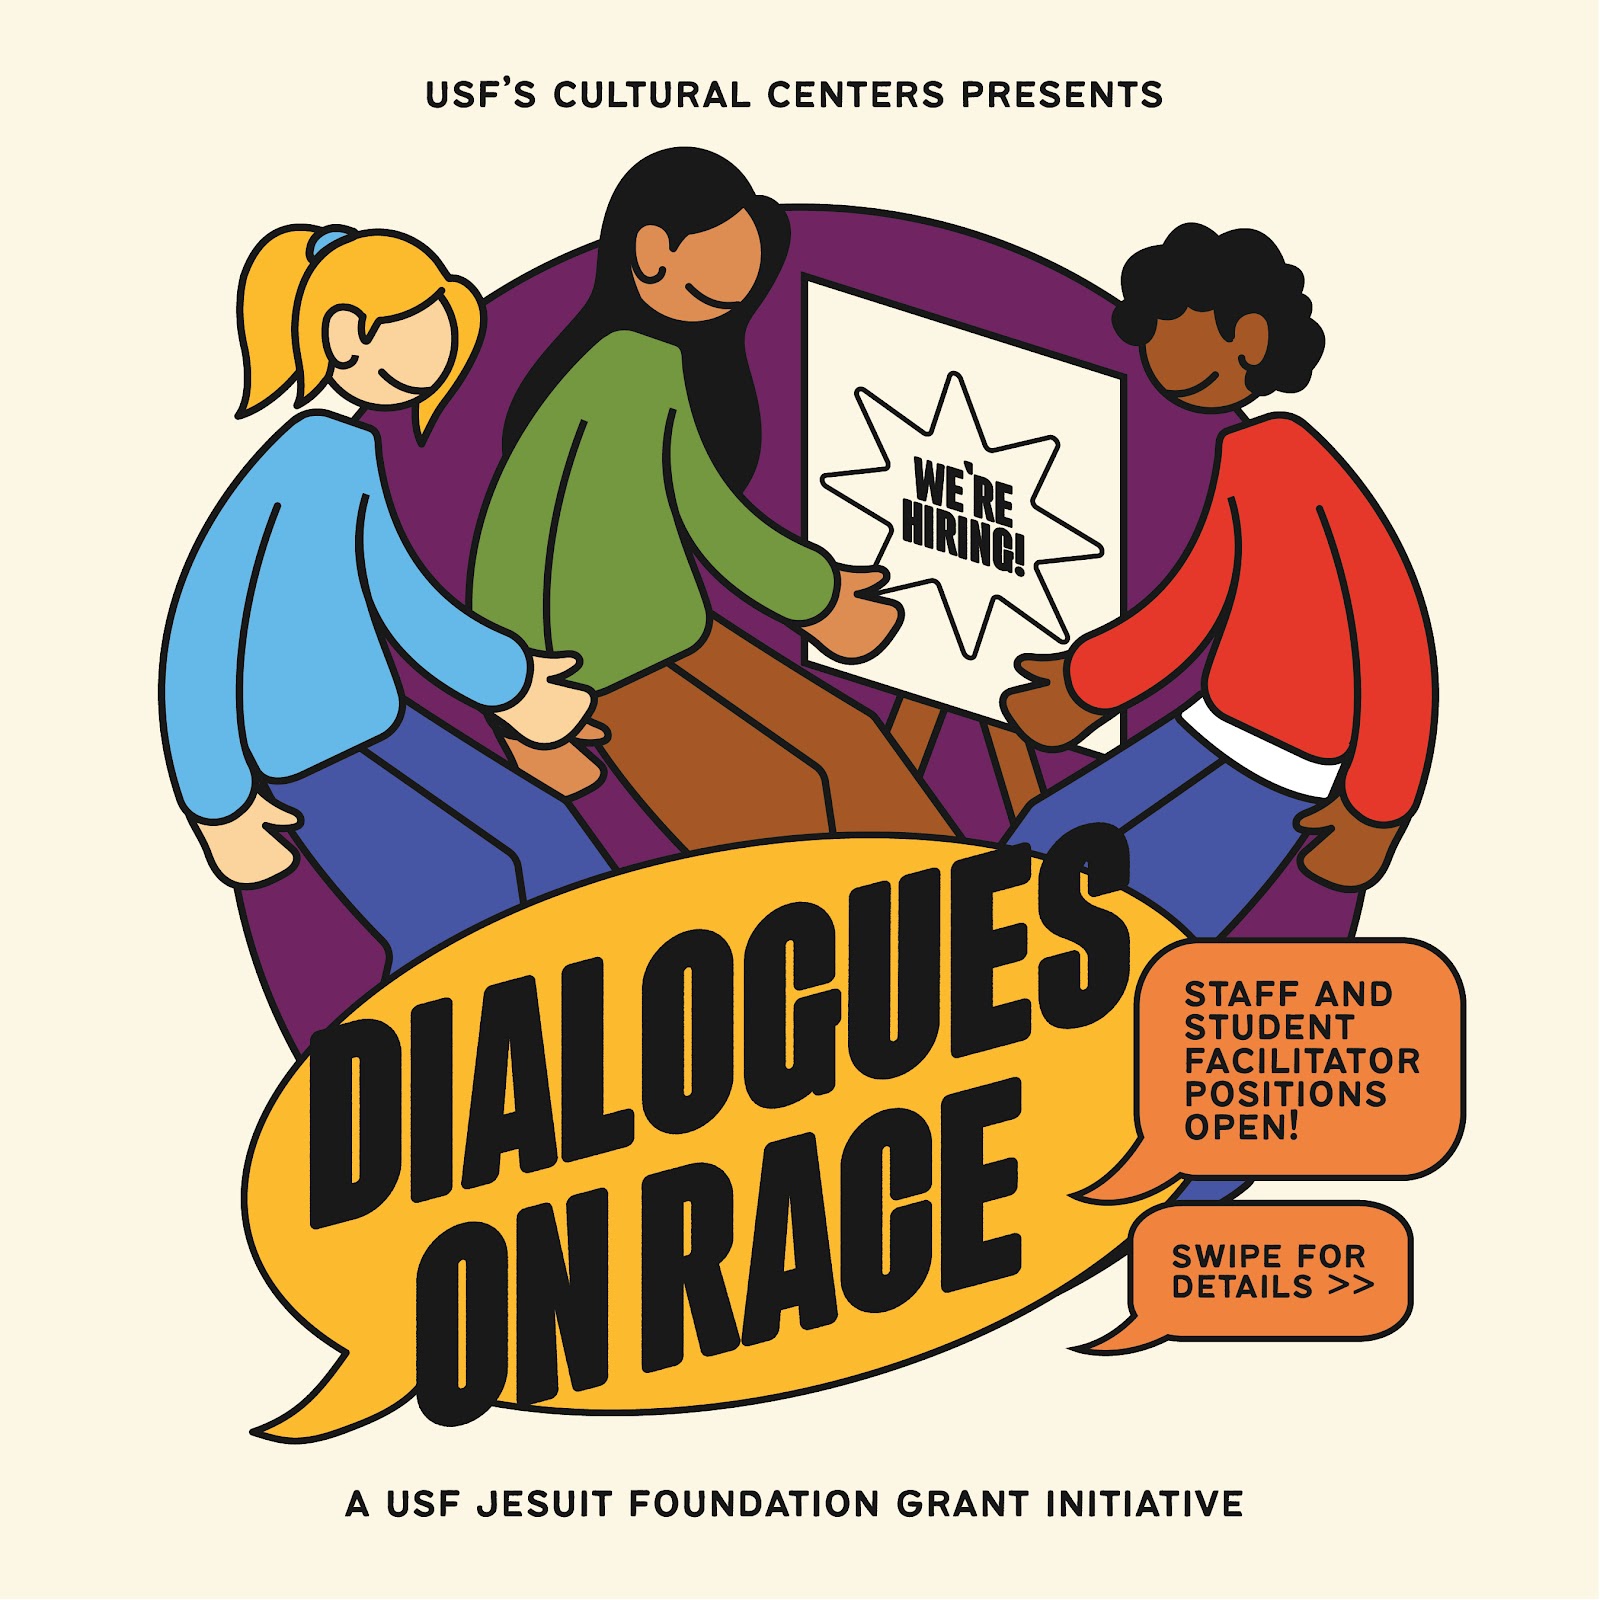 Dialogues on Race flyer